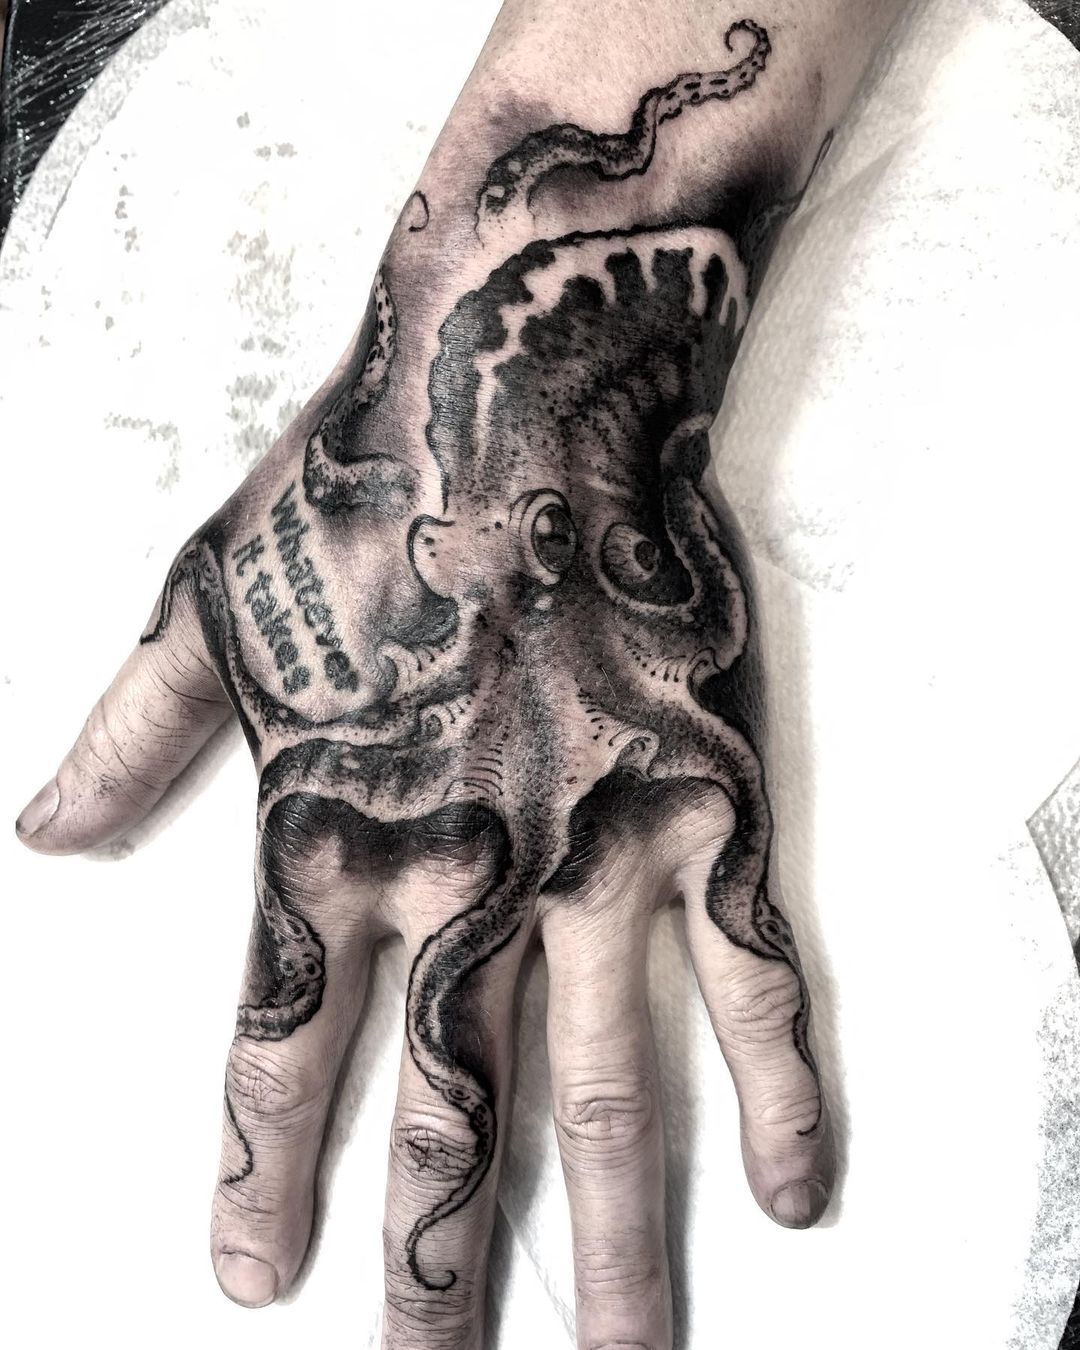 FrankeTat2  Free hand octopus  tattoo done today Very fun